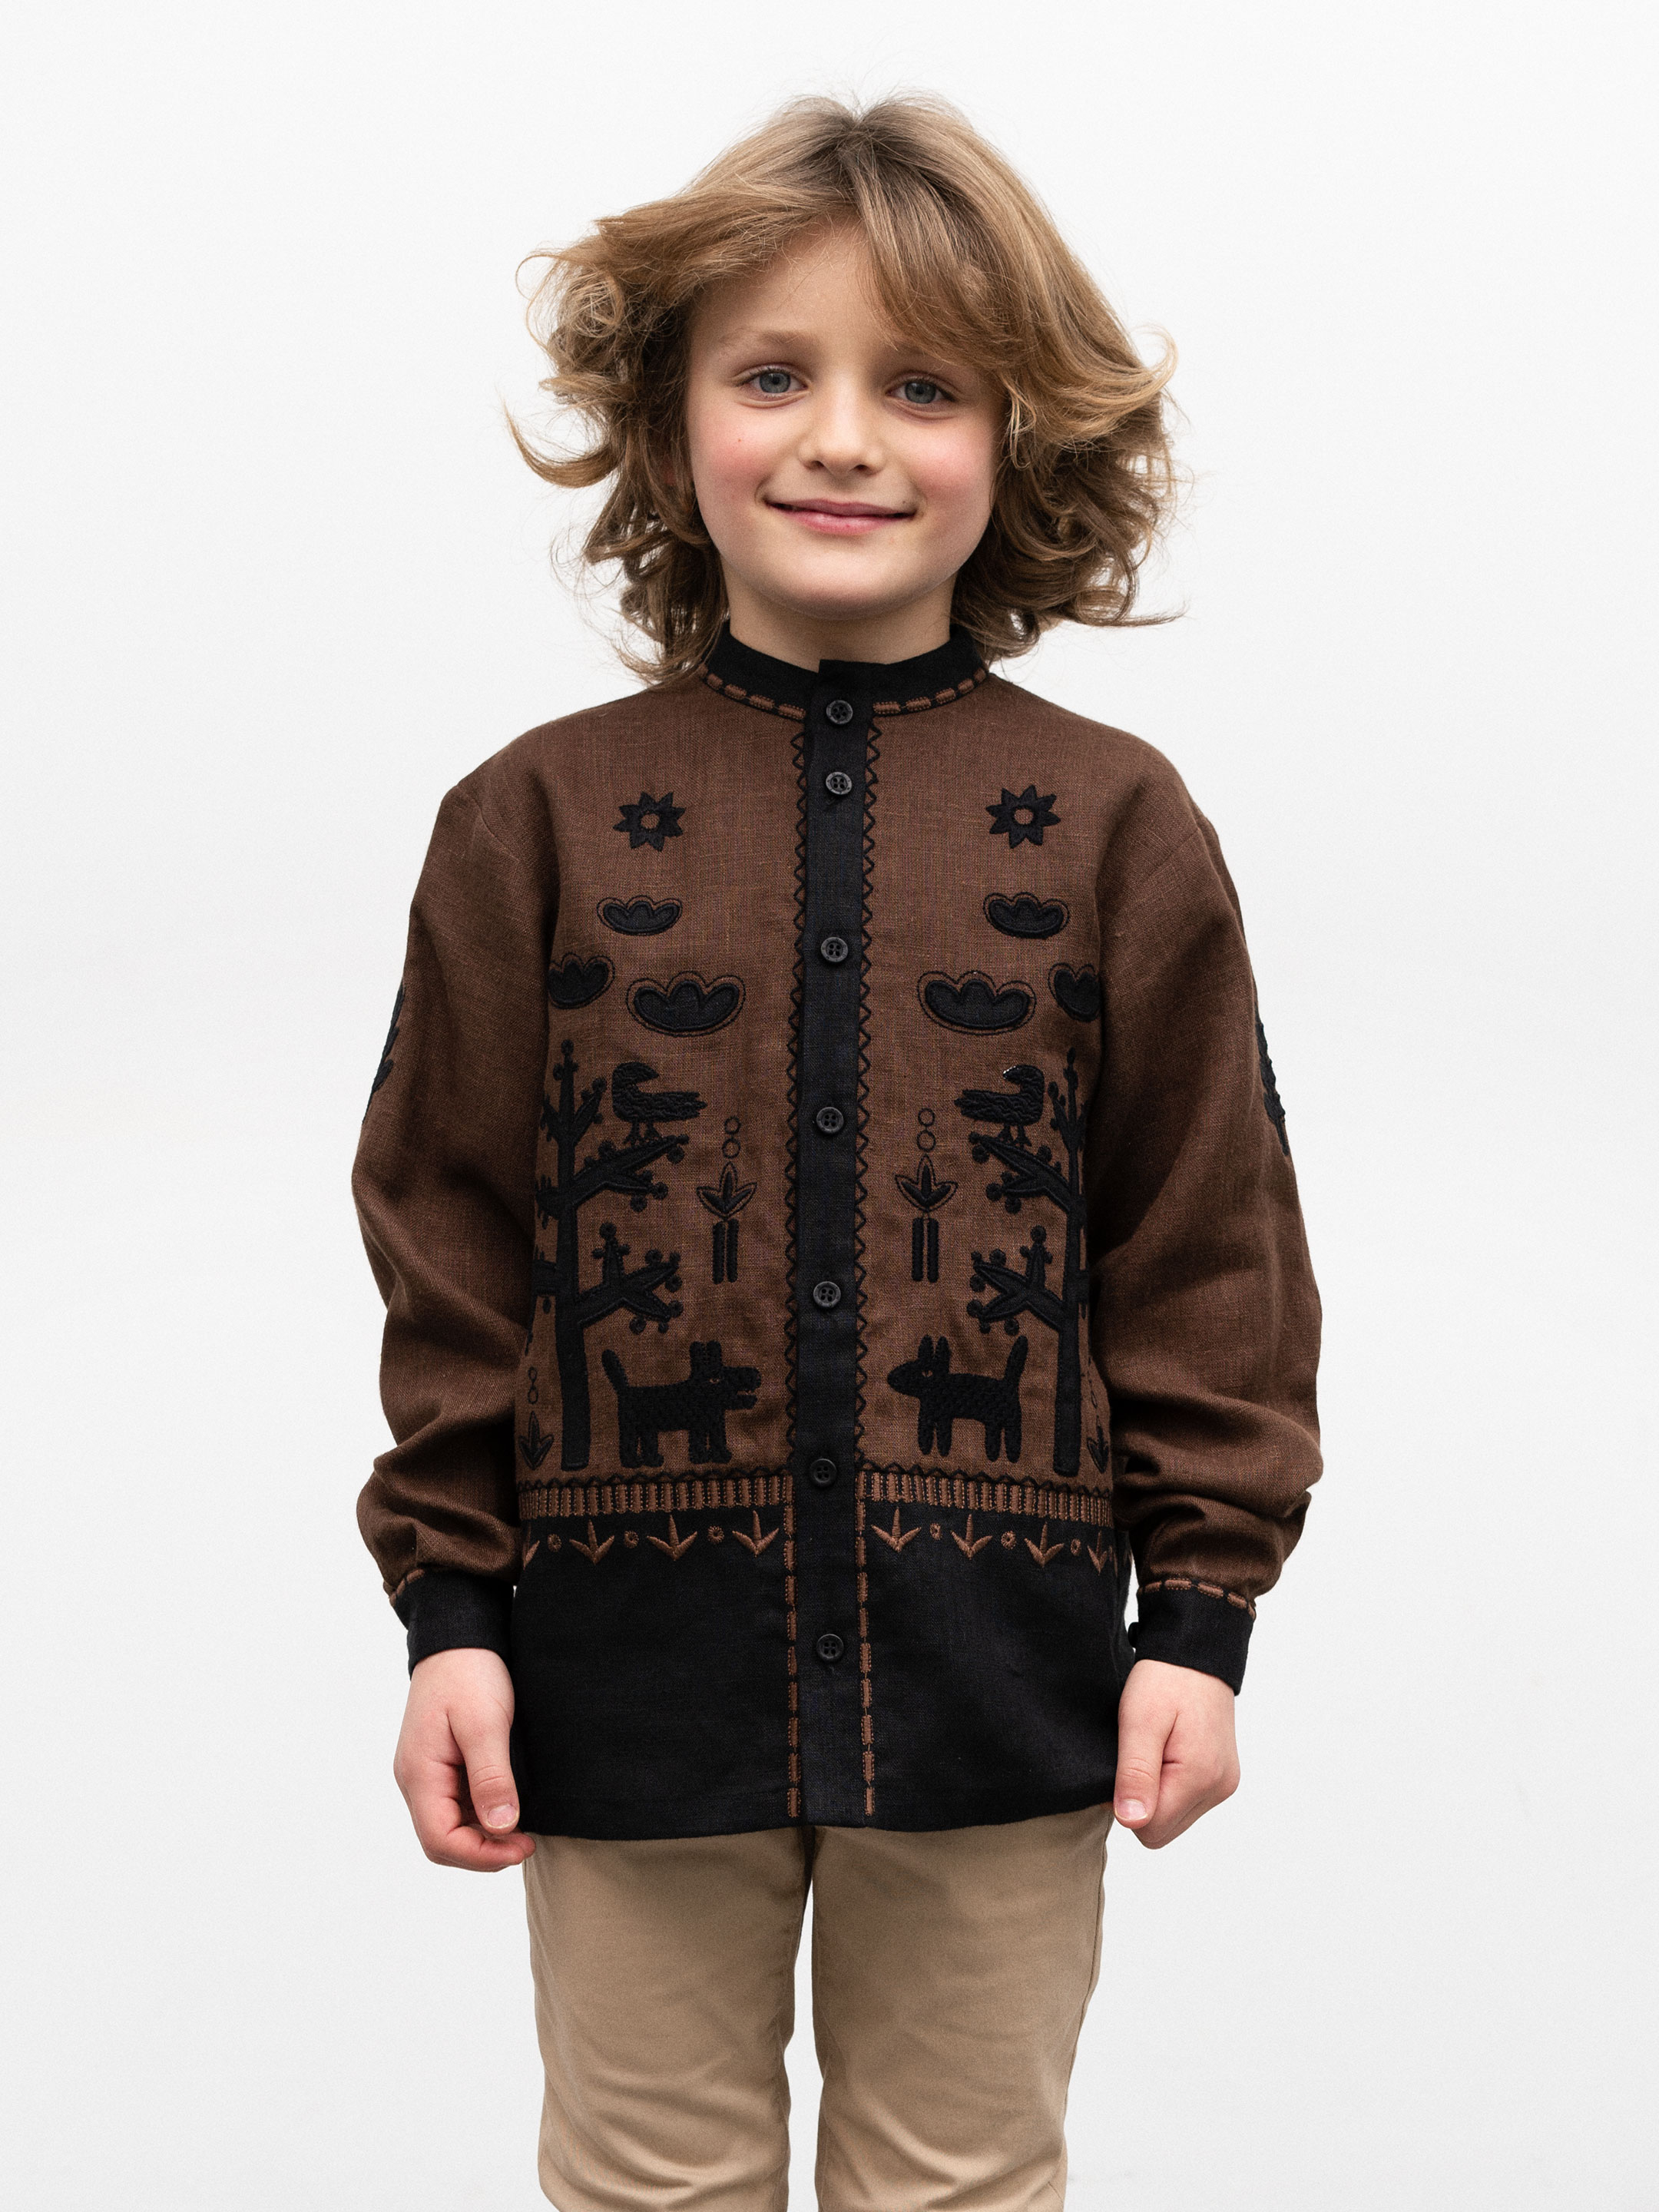 Embroidered shirt for a boy Sirko - photo 1